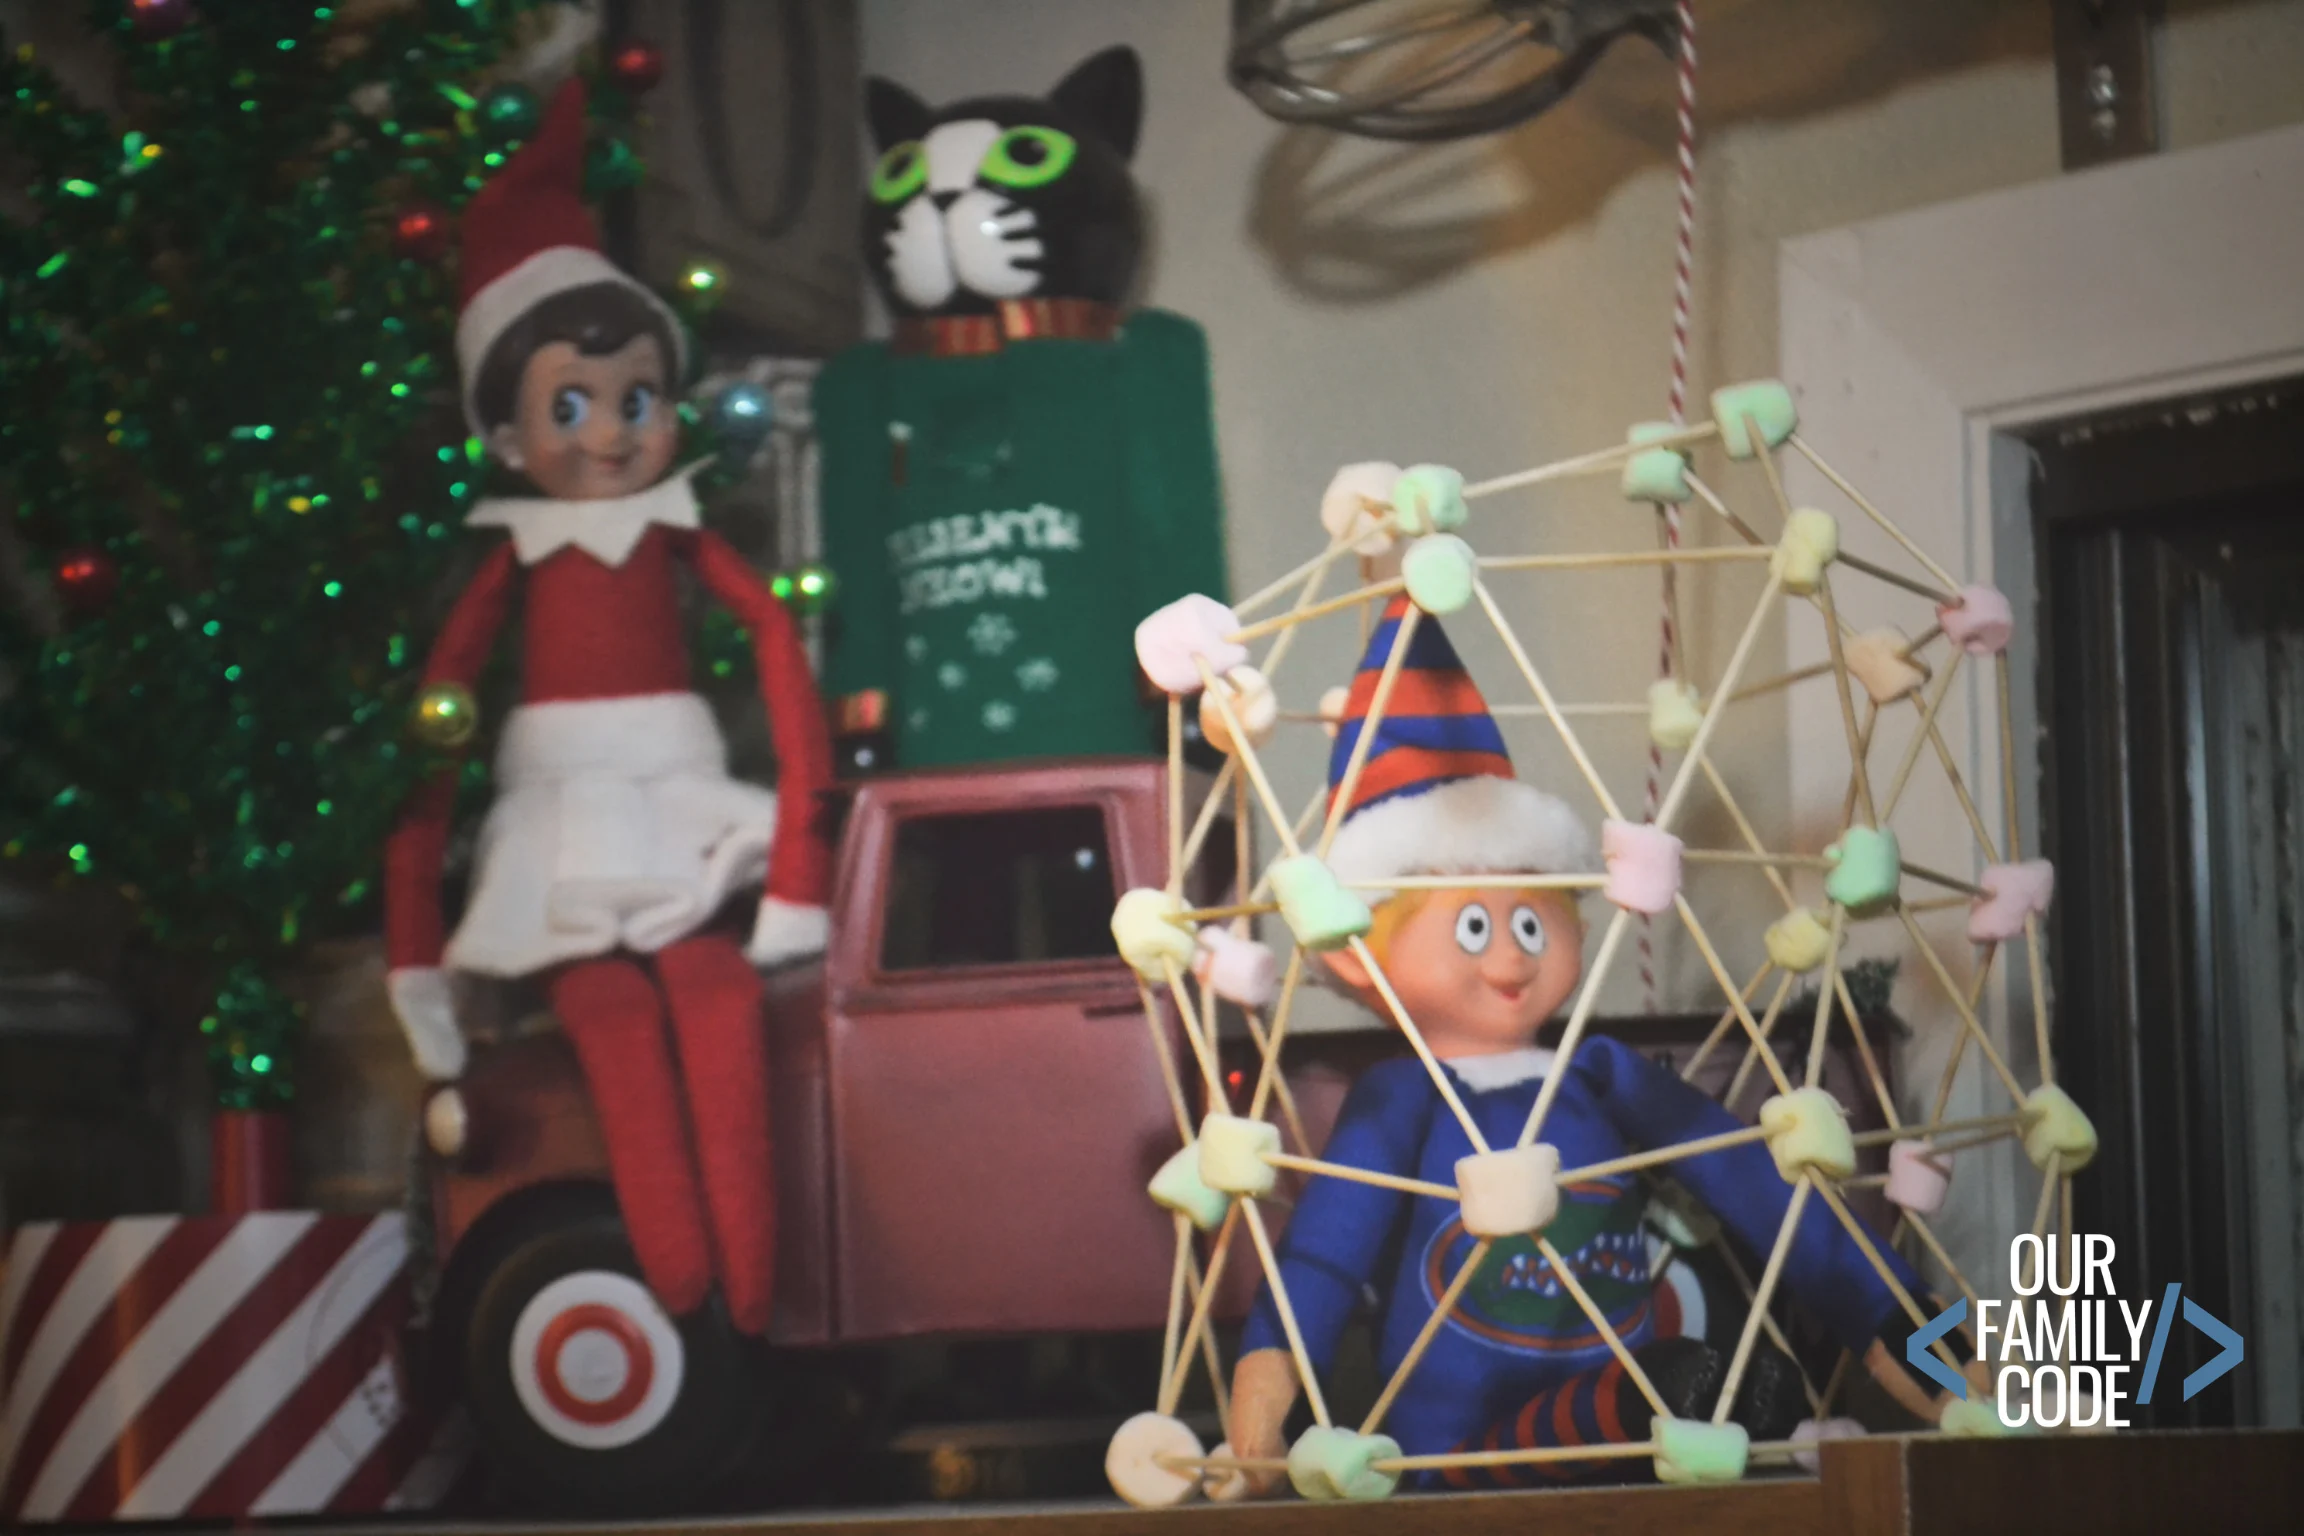 A picture of an elf on the shelf trapped in a marshmallow toothpick structure.